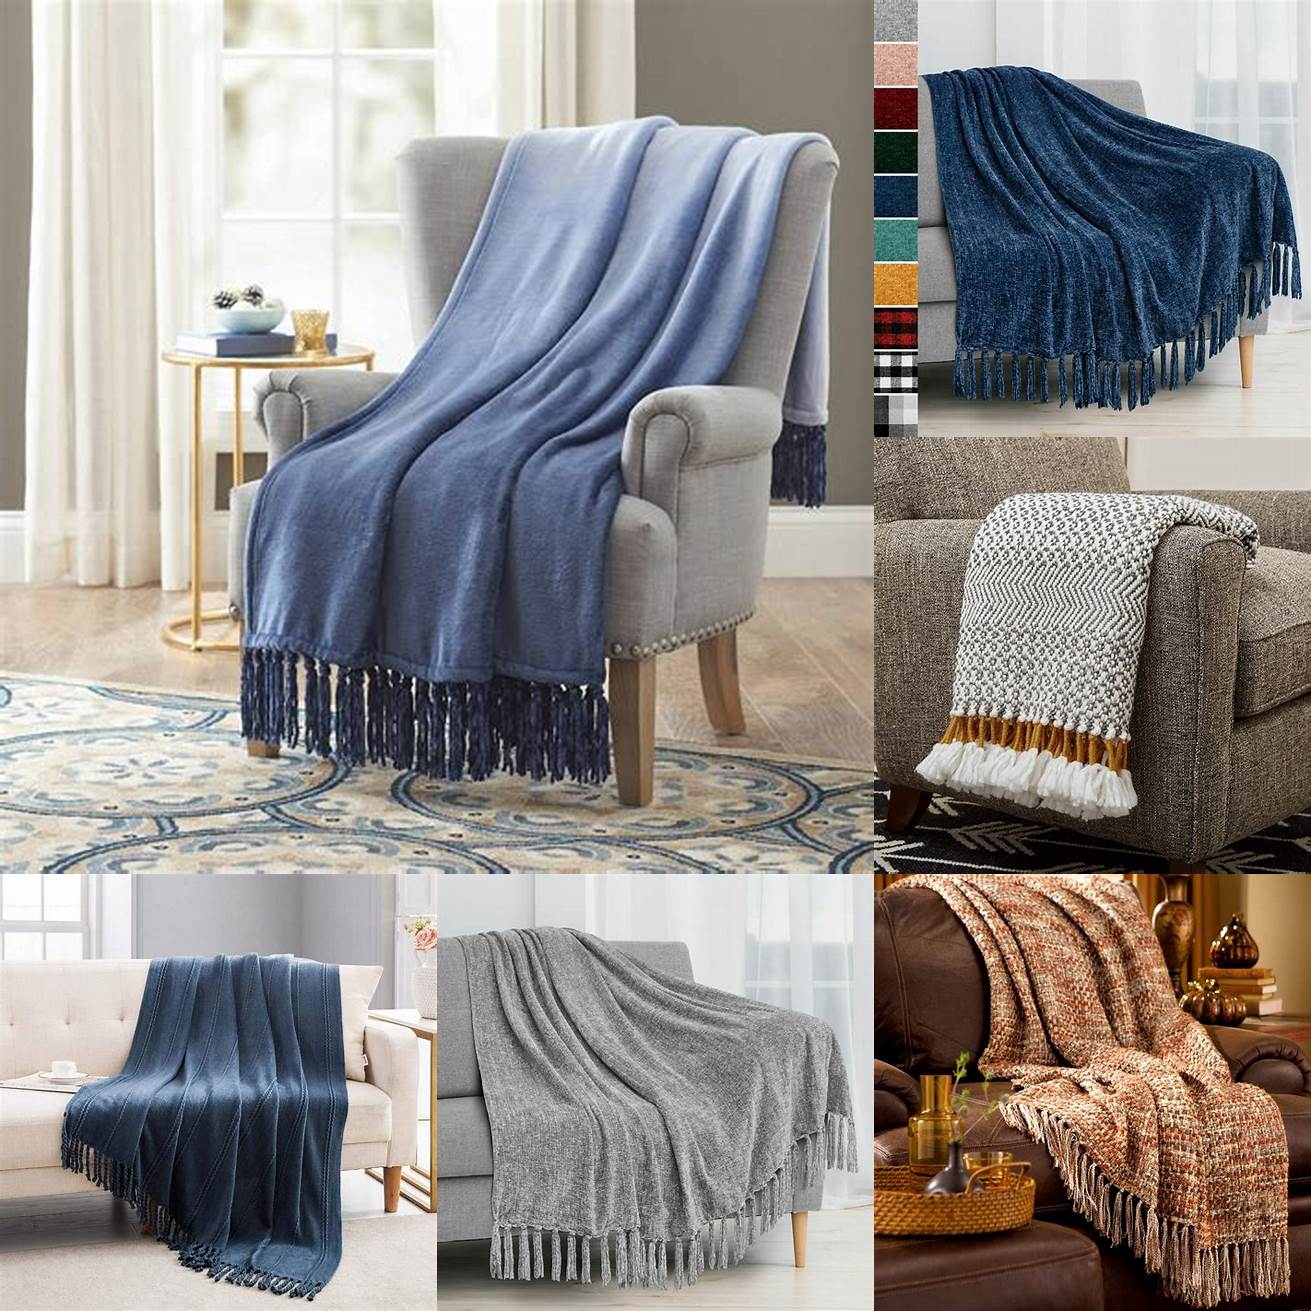 Throw blanket with fringe detail